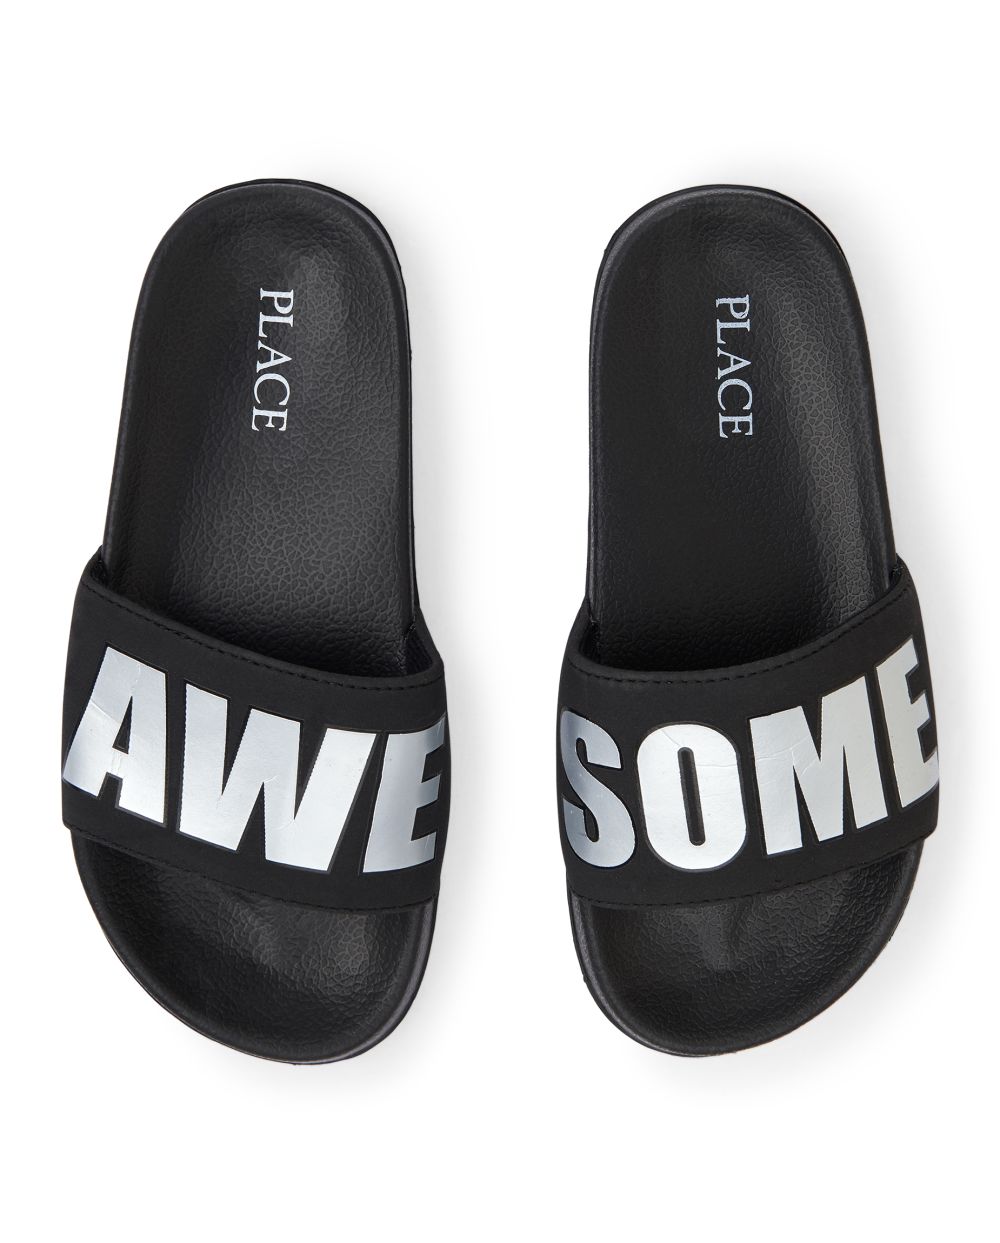 Boys 'Awesome' Faux Leather Slides